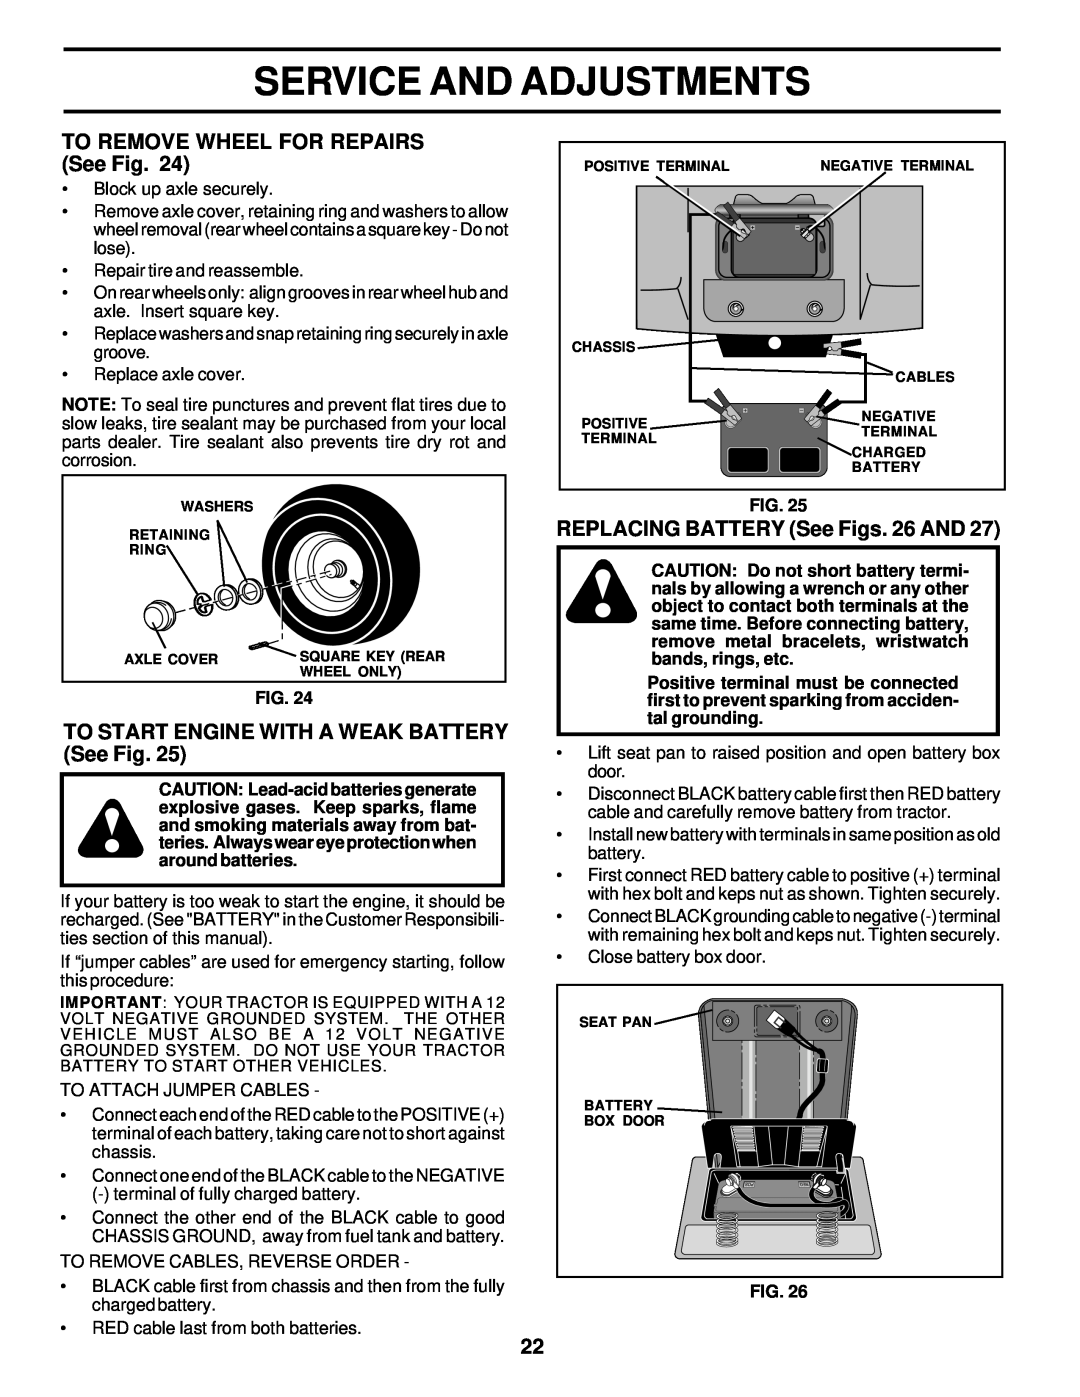 Weed Eater WE16542D owner manual TO REMOVE WHEEL FOR REPAIRS See Fig, TO START ENGINE WITH A WEAK BATTERY See Fig 